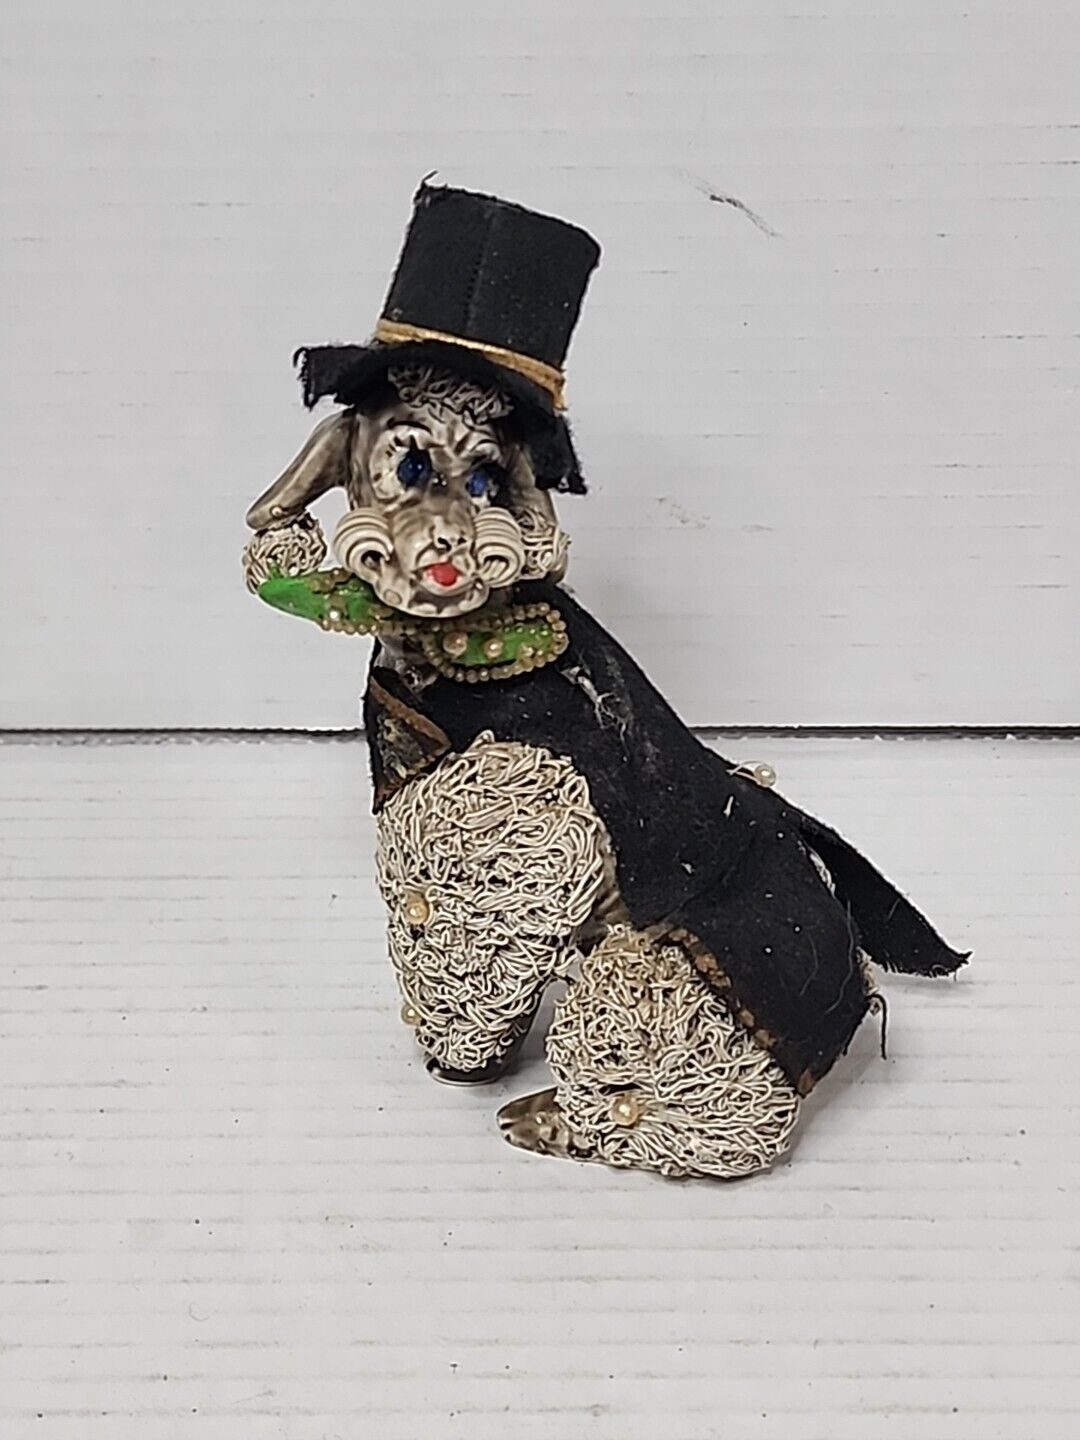 Vintage Wales Spaghetti Poodle Sitting dog figurine gray 5.5” Top Hat & Coat...